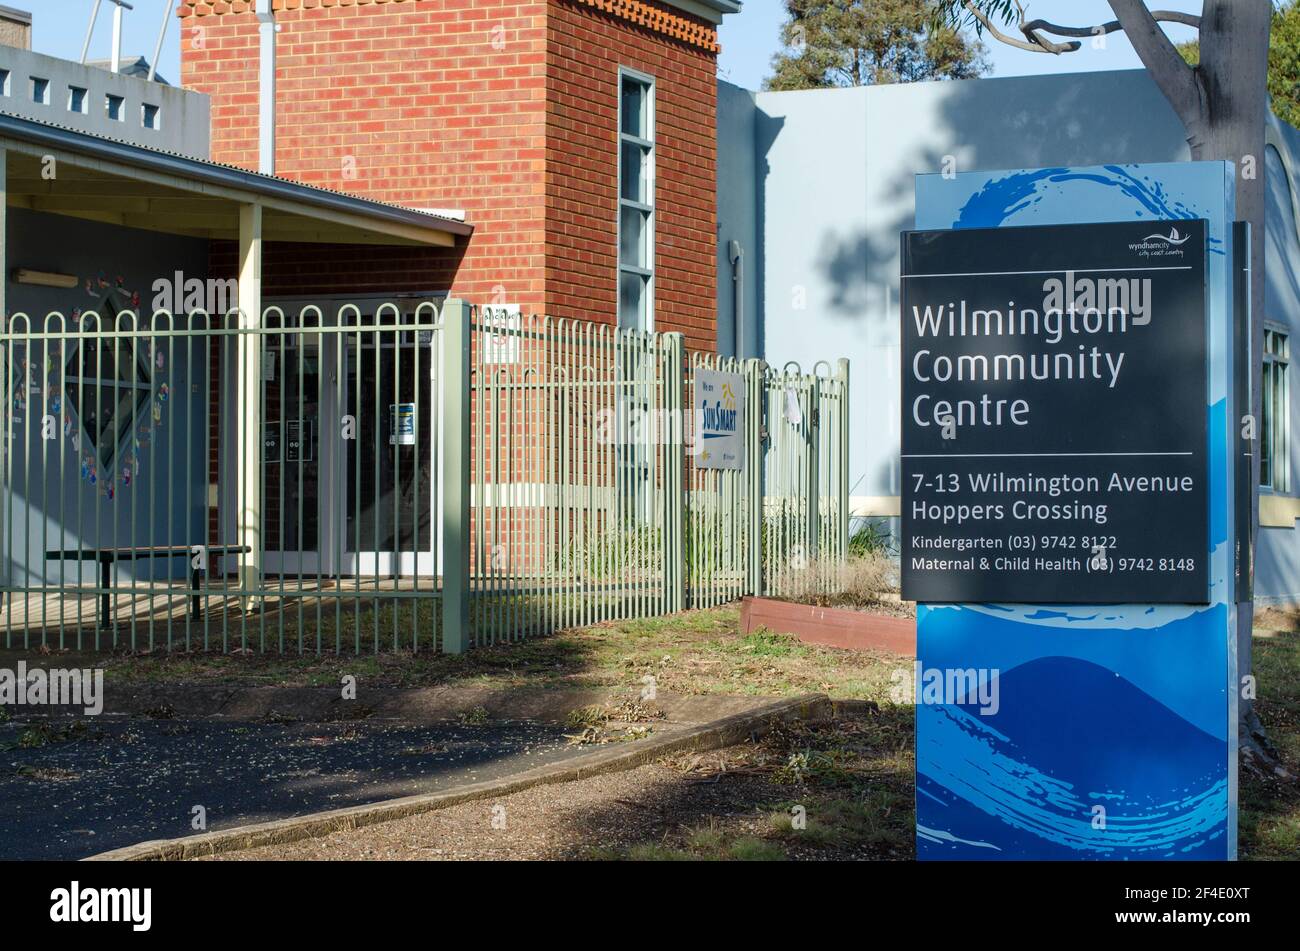 The sign of an Australian suburban Community Centre -- the Wilmington Community Centre, offering kindergarten and Maternal & Child Health service. Stock Photo